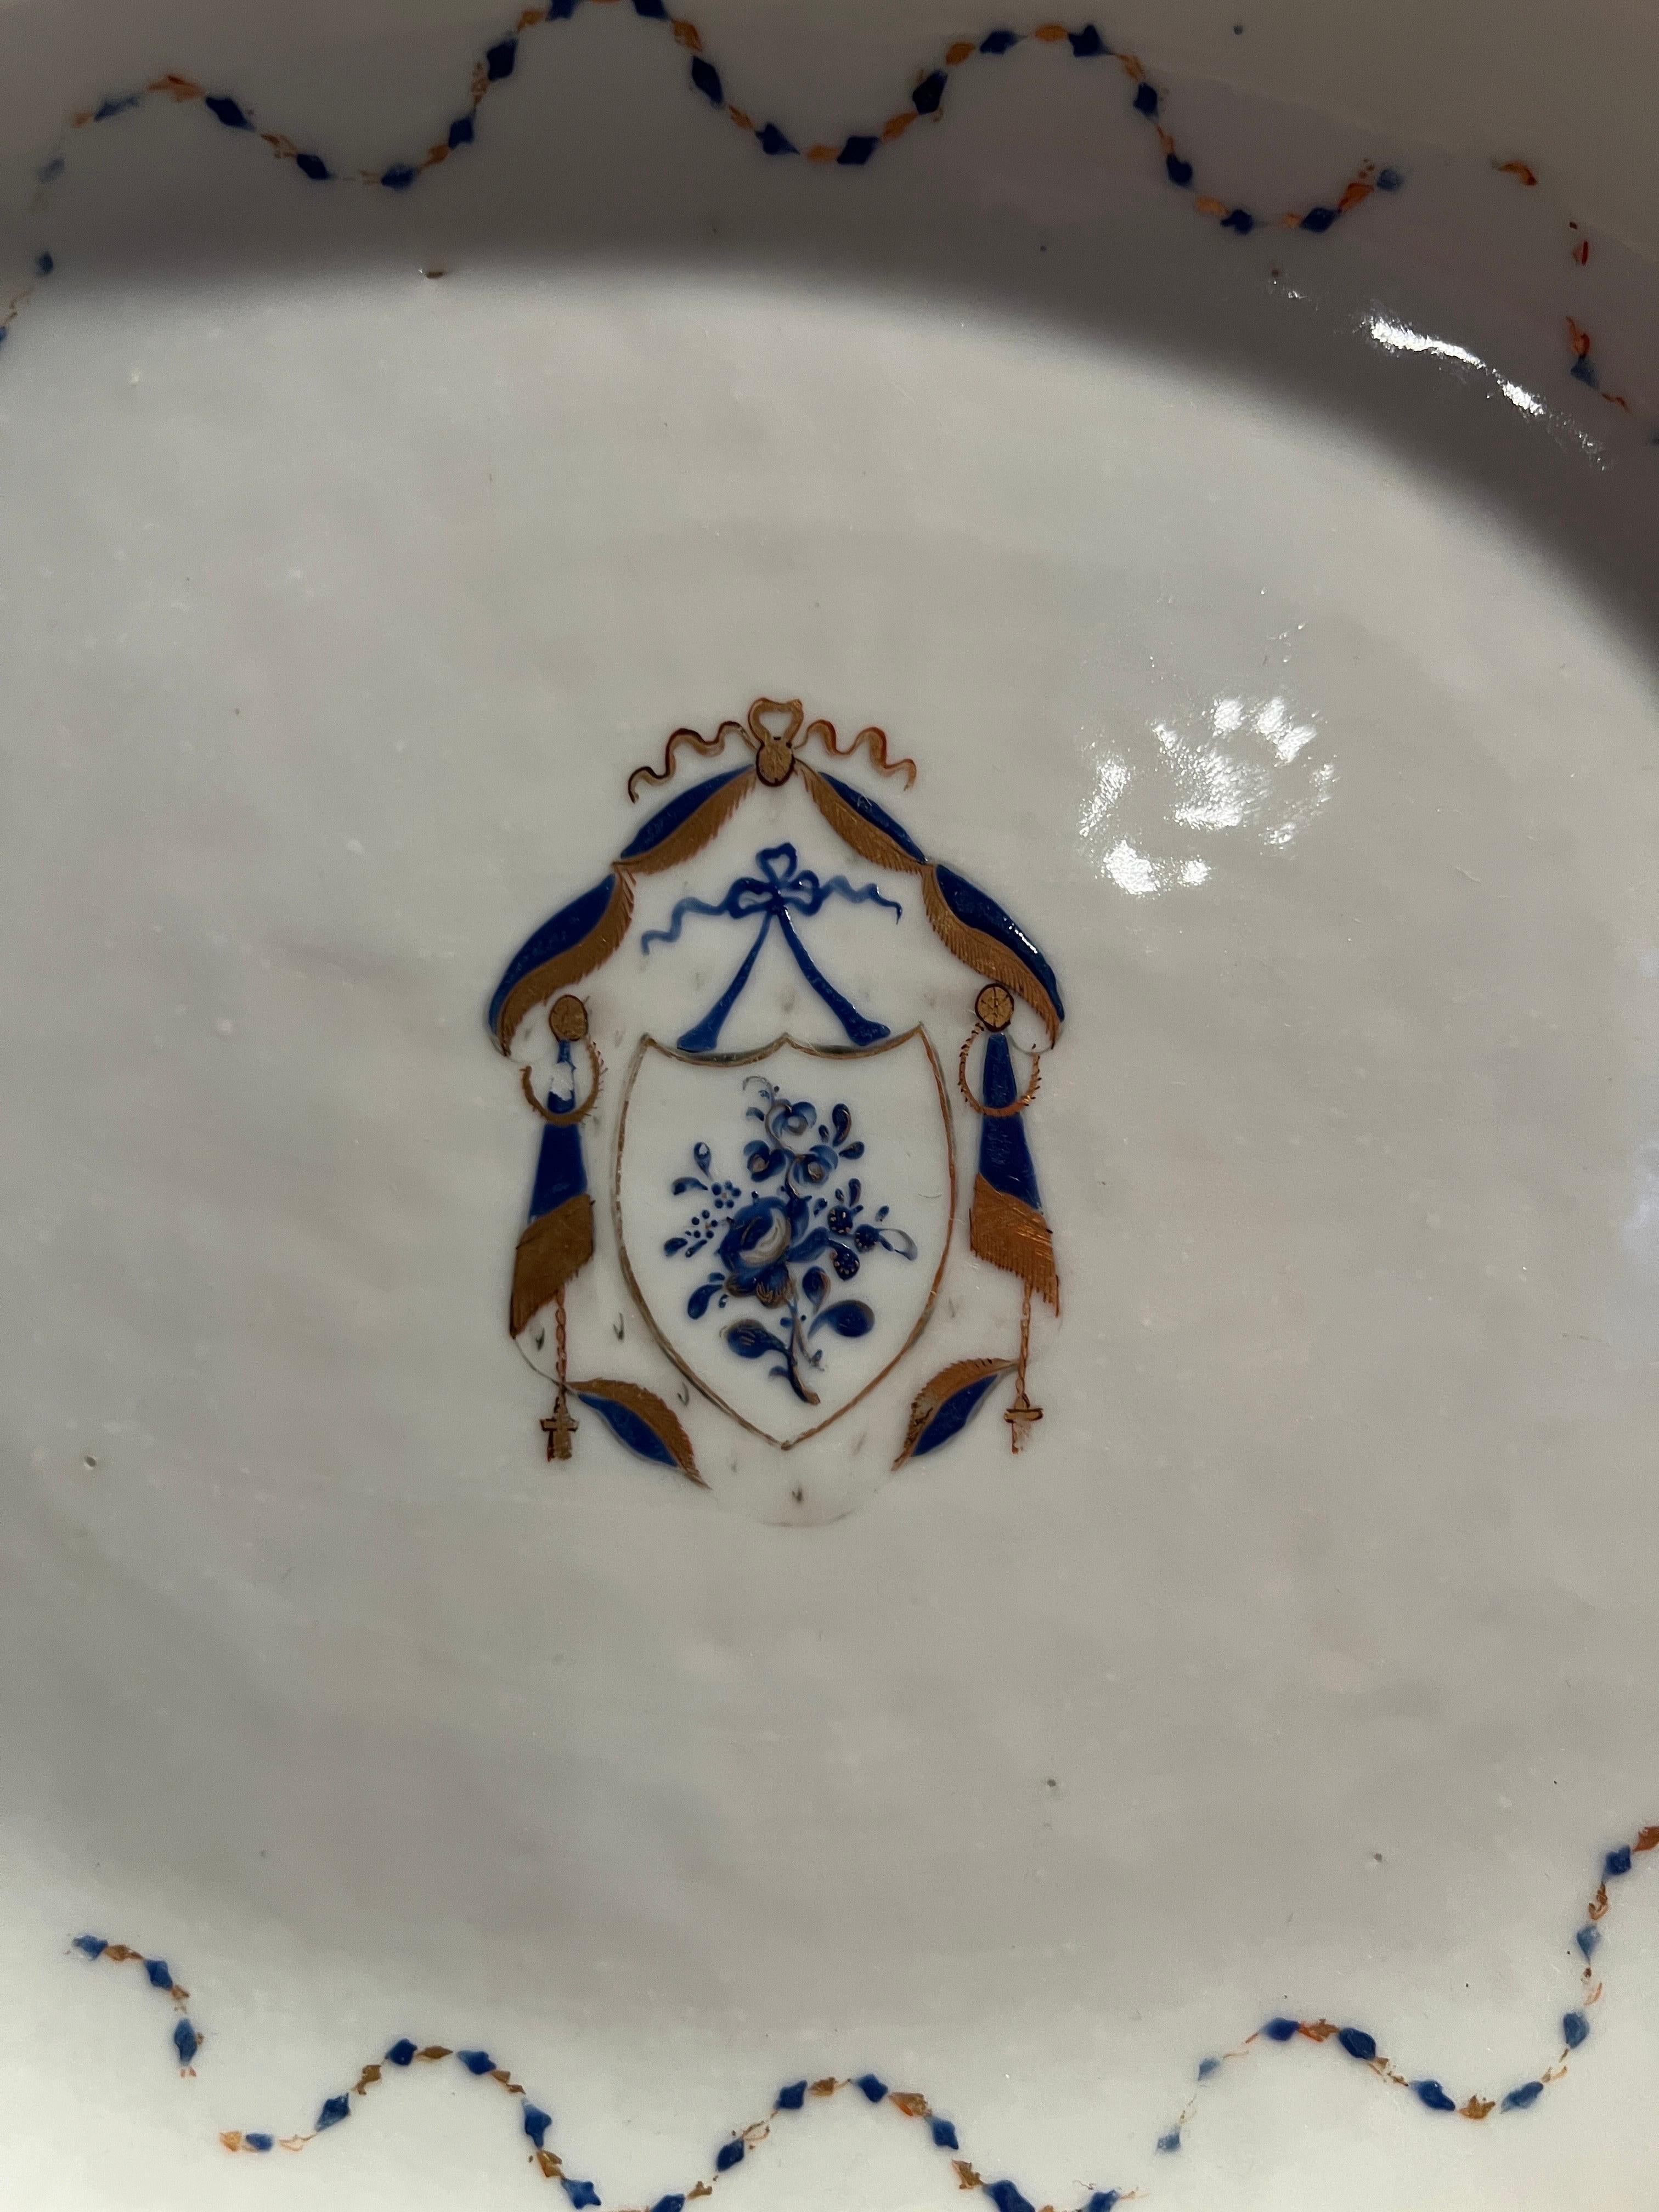 Chinese Export, late 18th to early 19th century.

An antique porcelain platter with a blue enameled edge, chestnut basket piercing between edge and recession, a gold and blue intertwining ribbon surrounding a wonderful central armorial medallion.